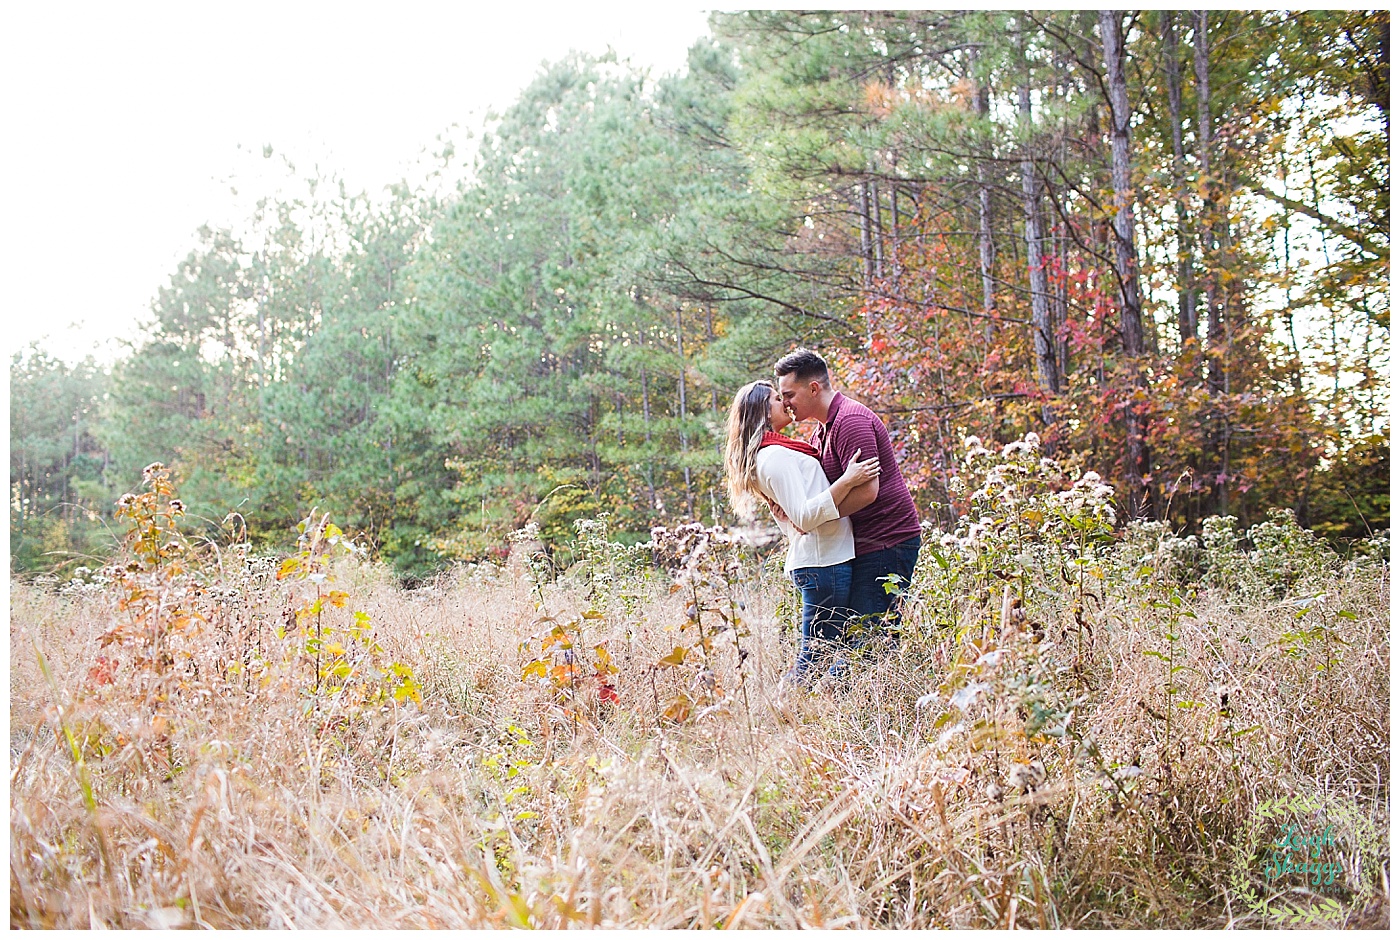 A Chesapeake virginia engagement session at oak grove lake park with the fall colors.